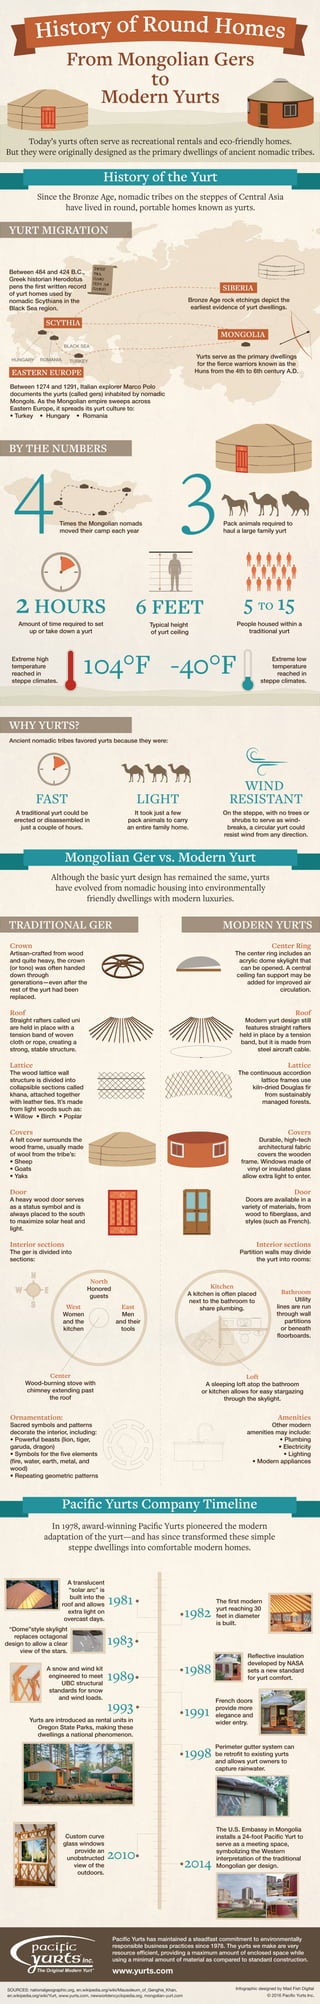 History of Round Homes: From Mongolian Gers to Modern Yurts | PDF